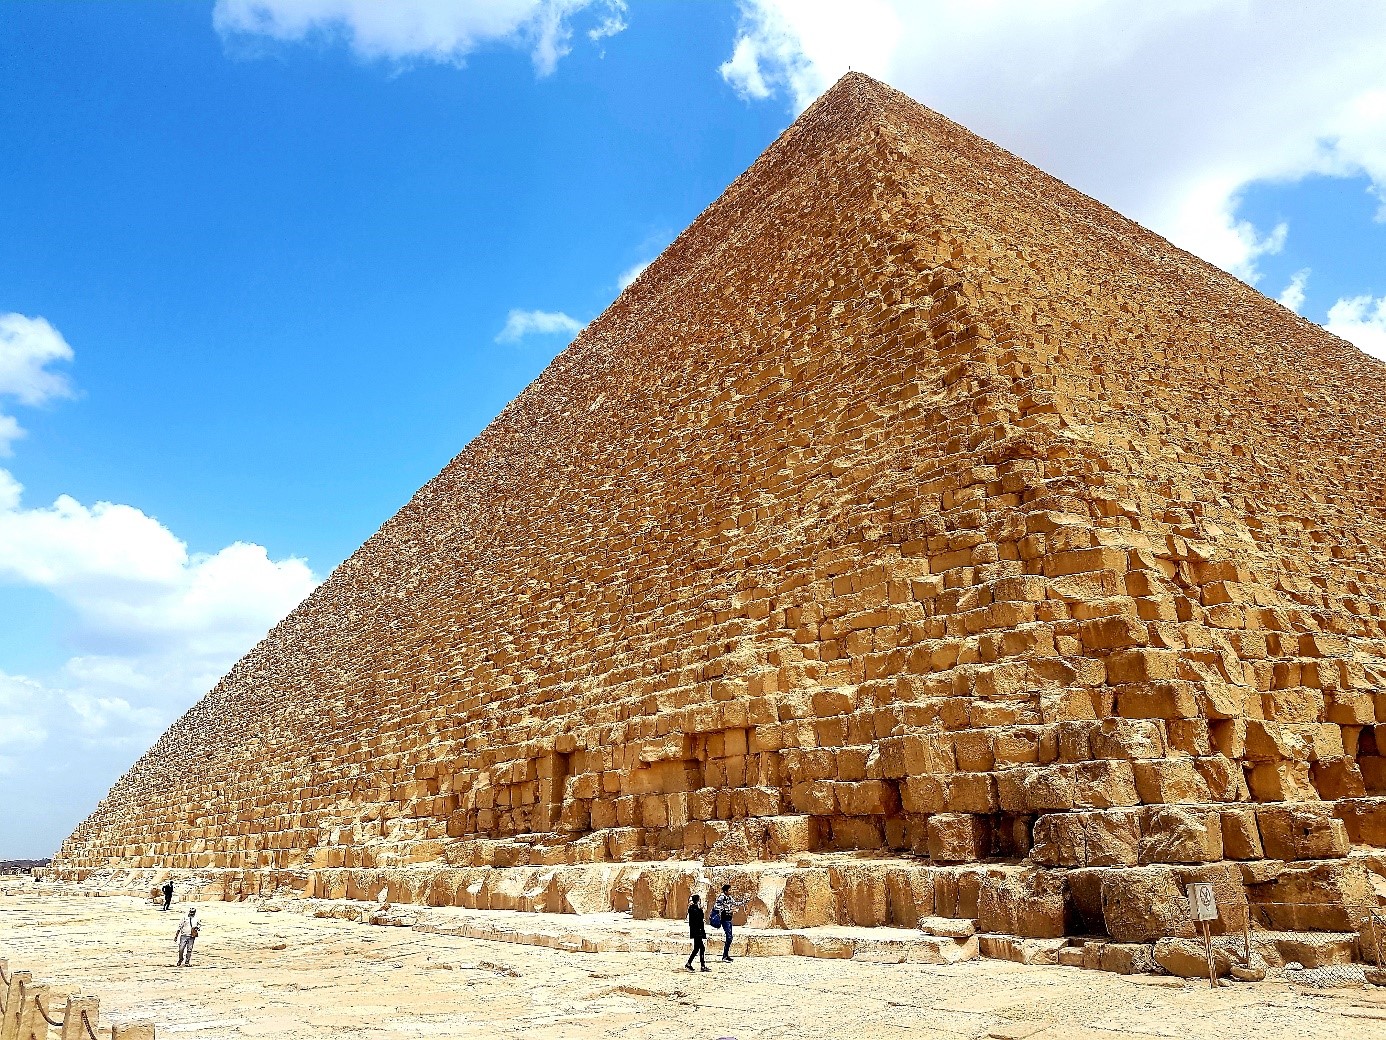 tour inside the great pyramid